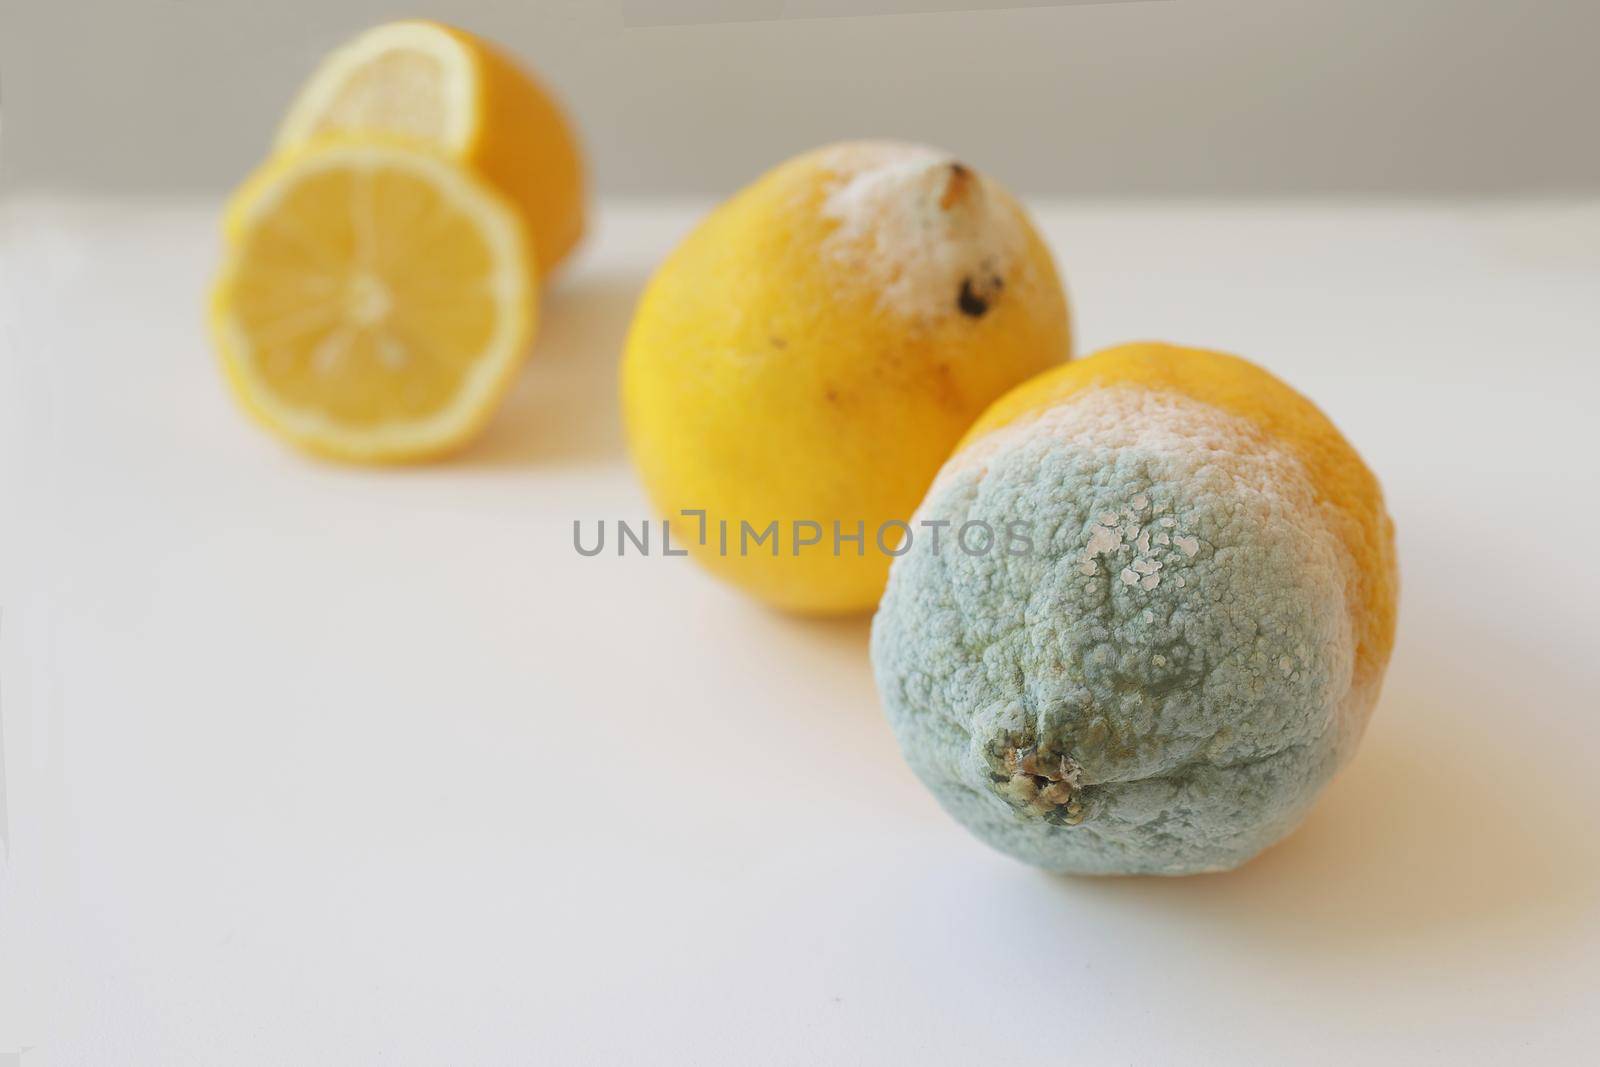 Blue mold on yellow lemon. Spoiled rotting fruit with mold on a white background. Blue-green mold on citrus fruits. Lemon with mold and fresh lemon on a white background. Moldy lemon. Green moldy lemon. Spoiled lemon with mold